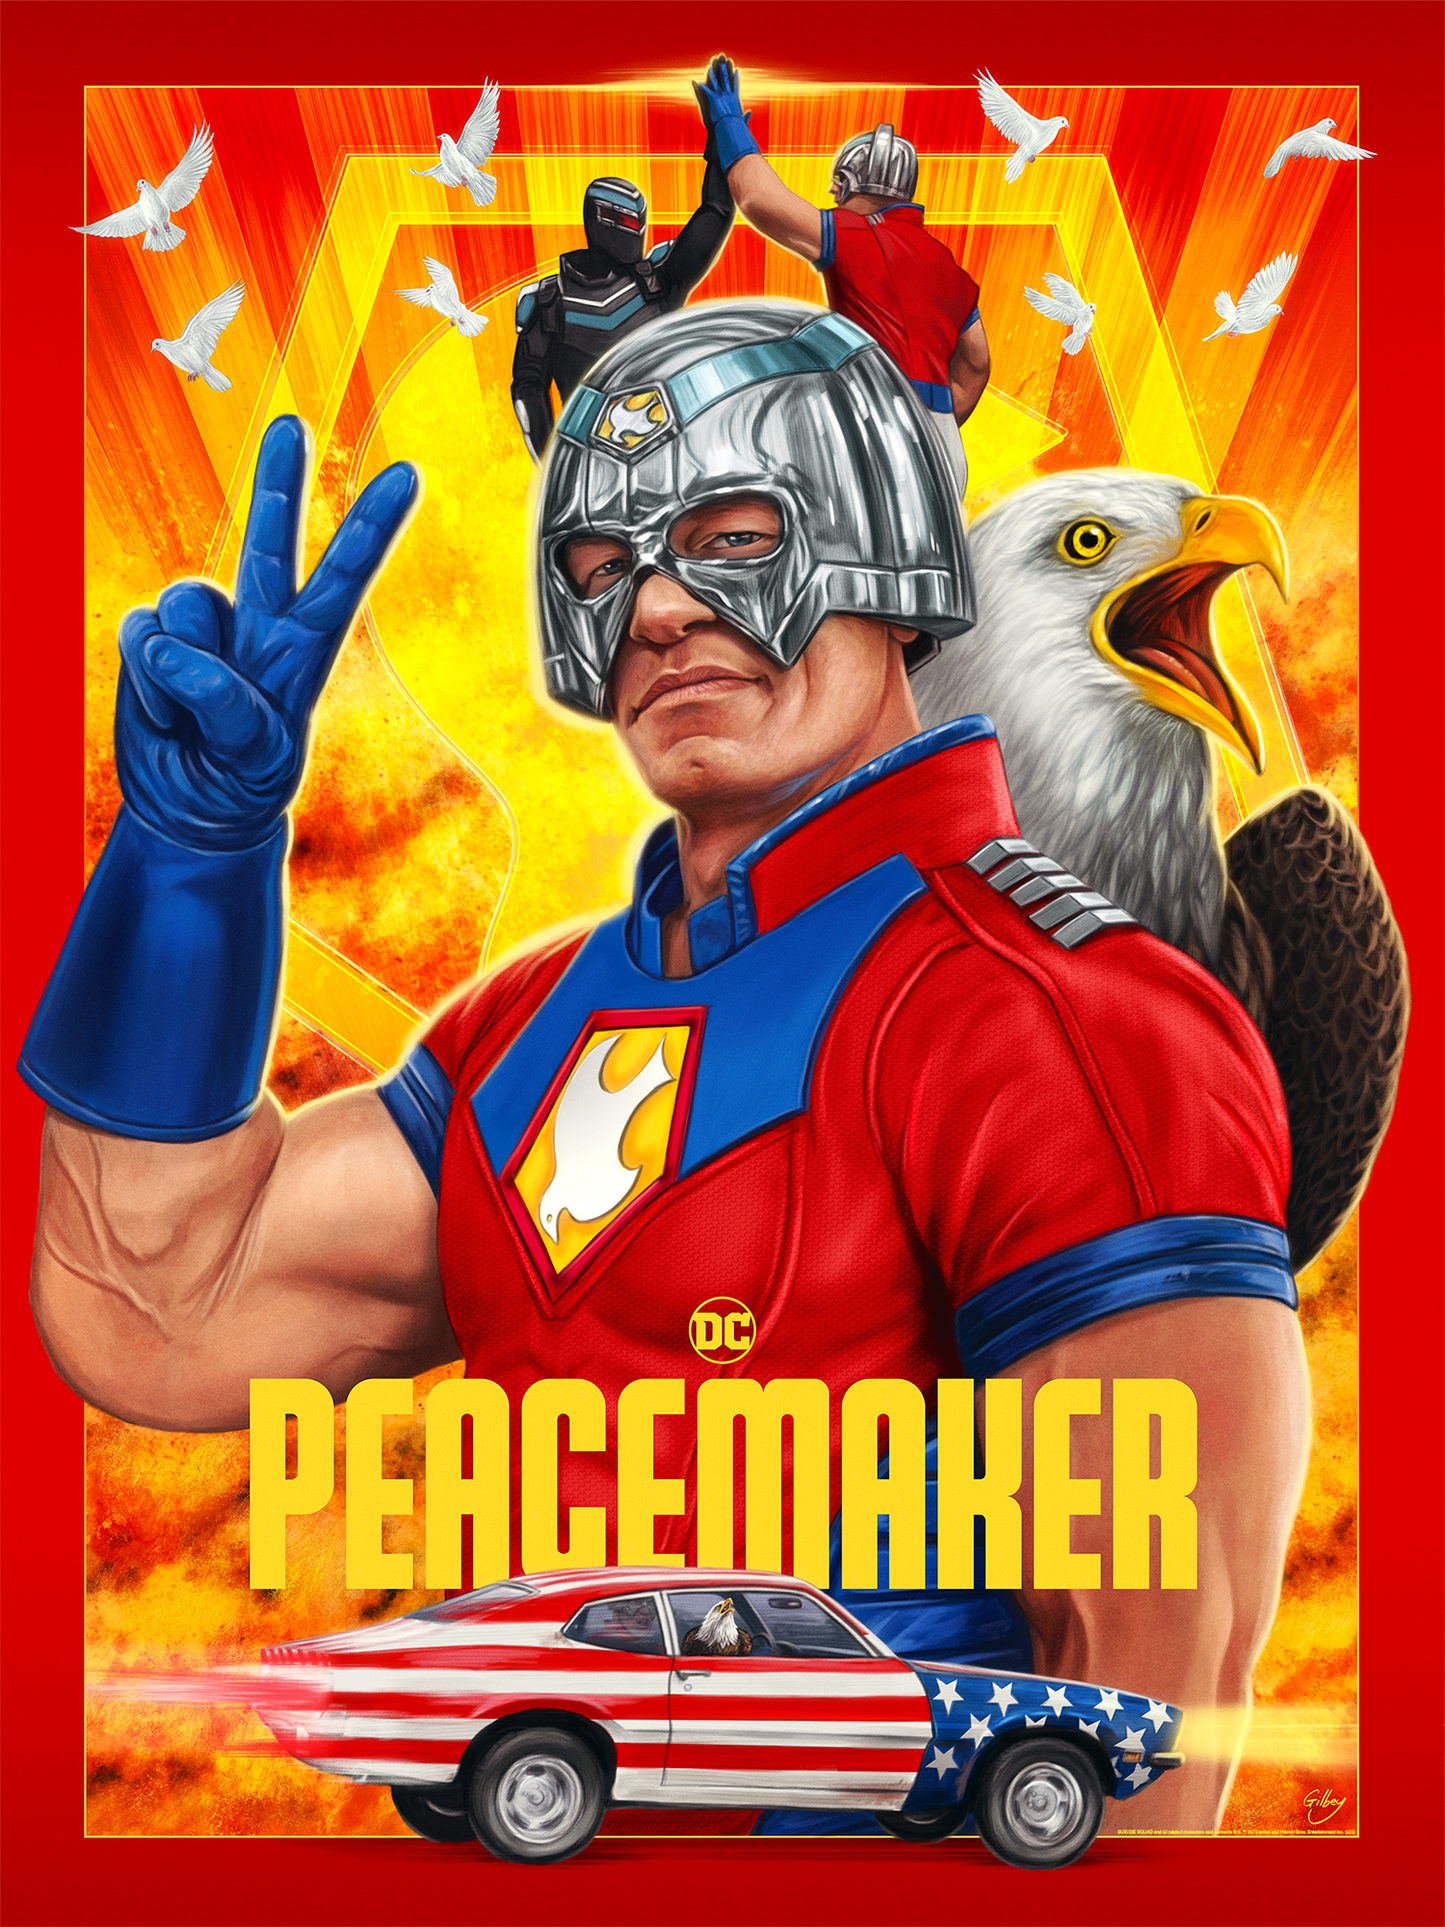 Sam Gilbey "Peacemaker"